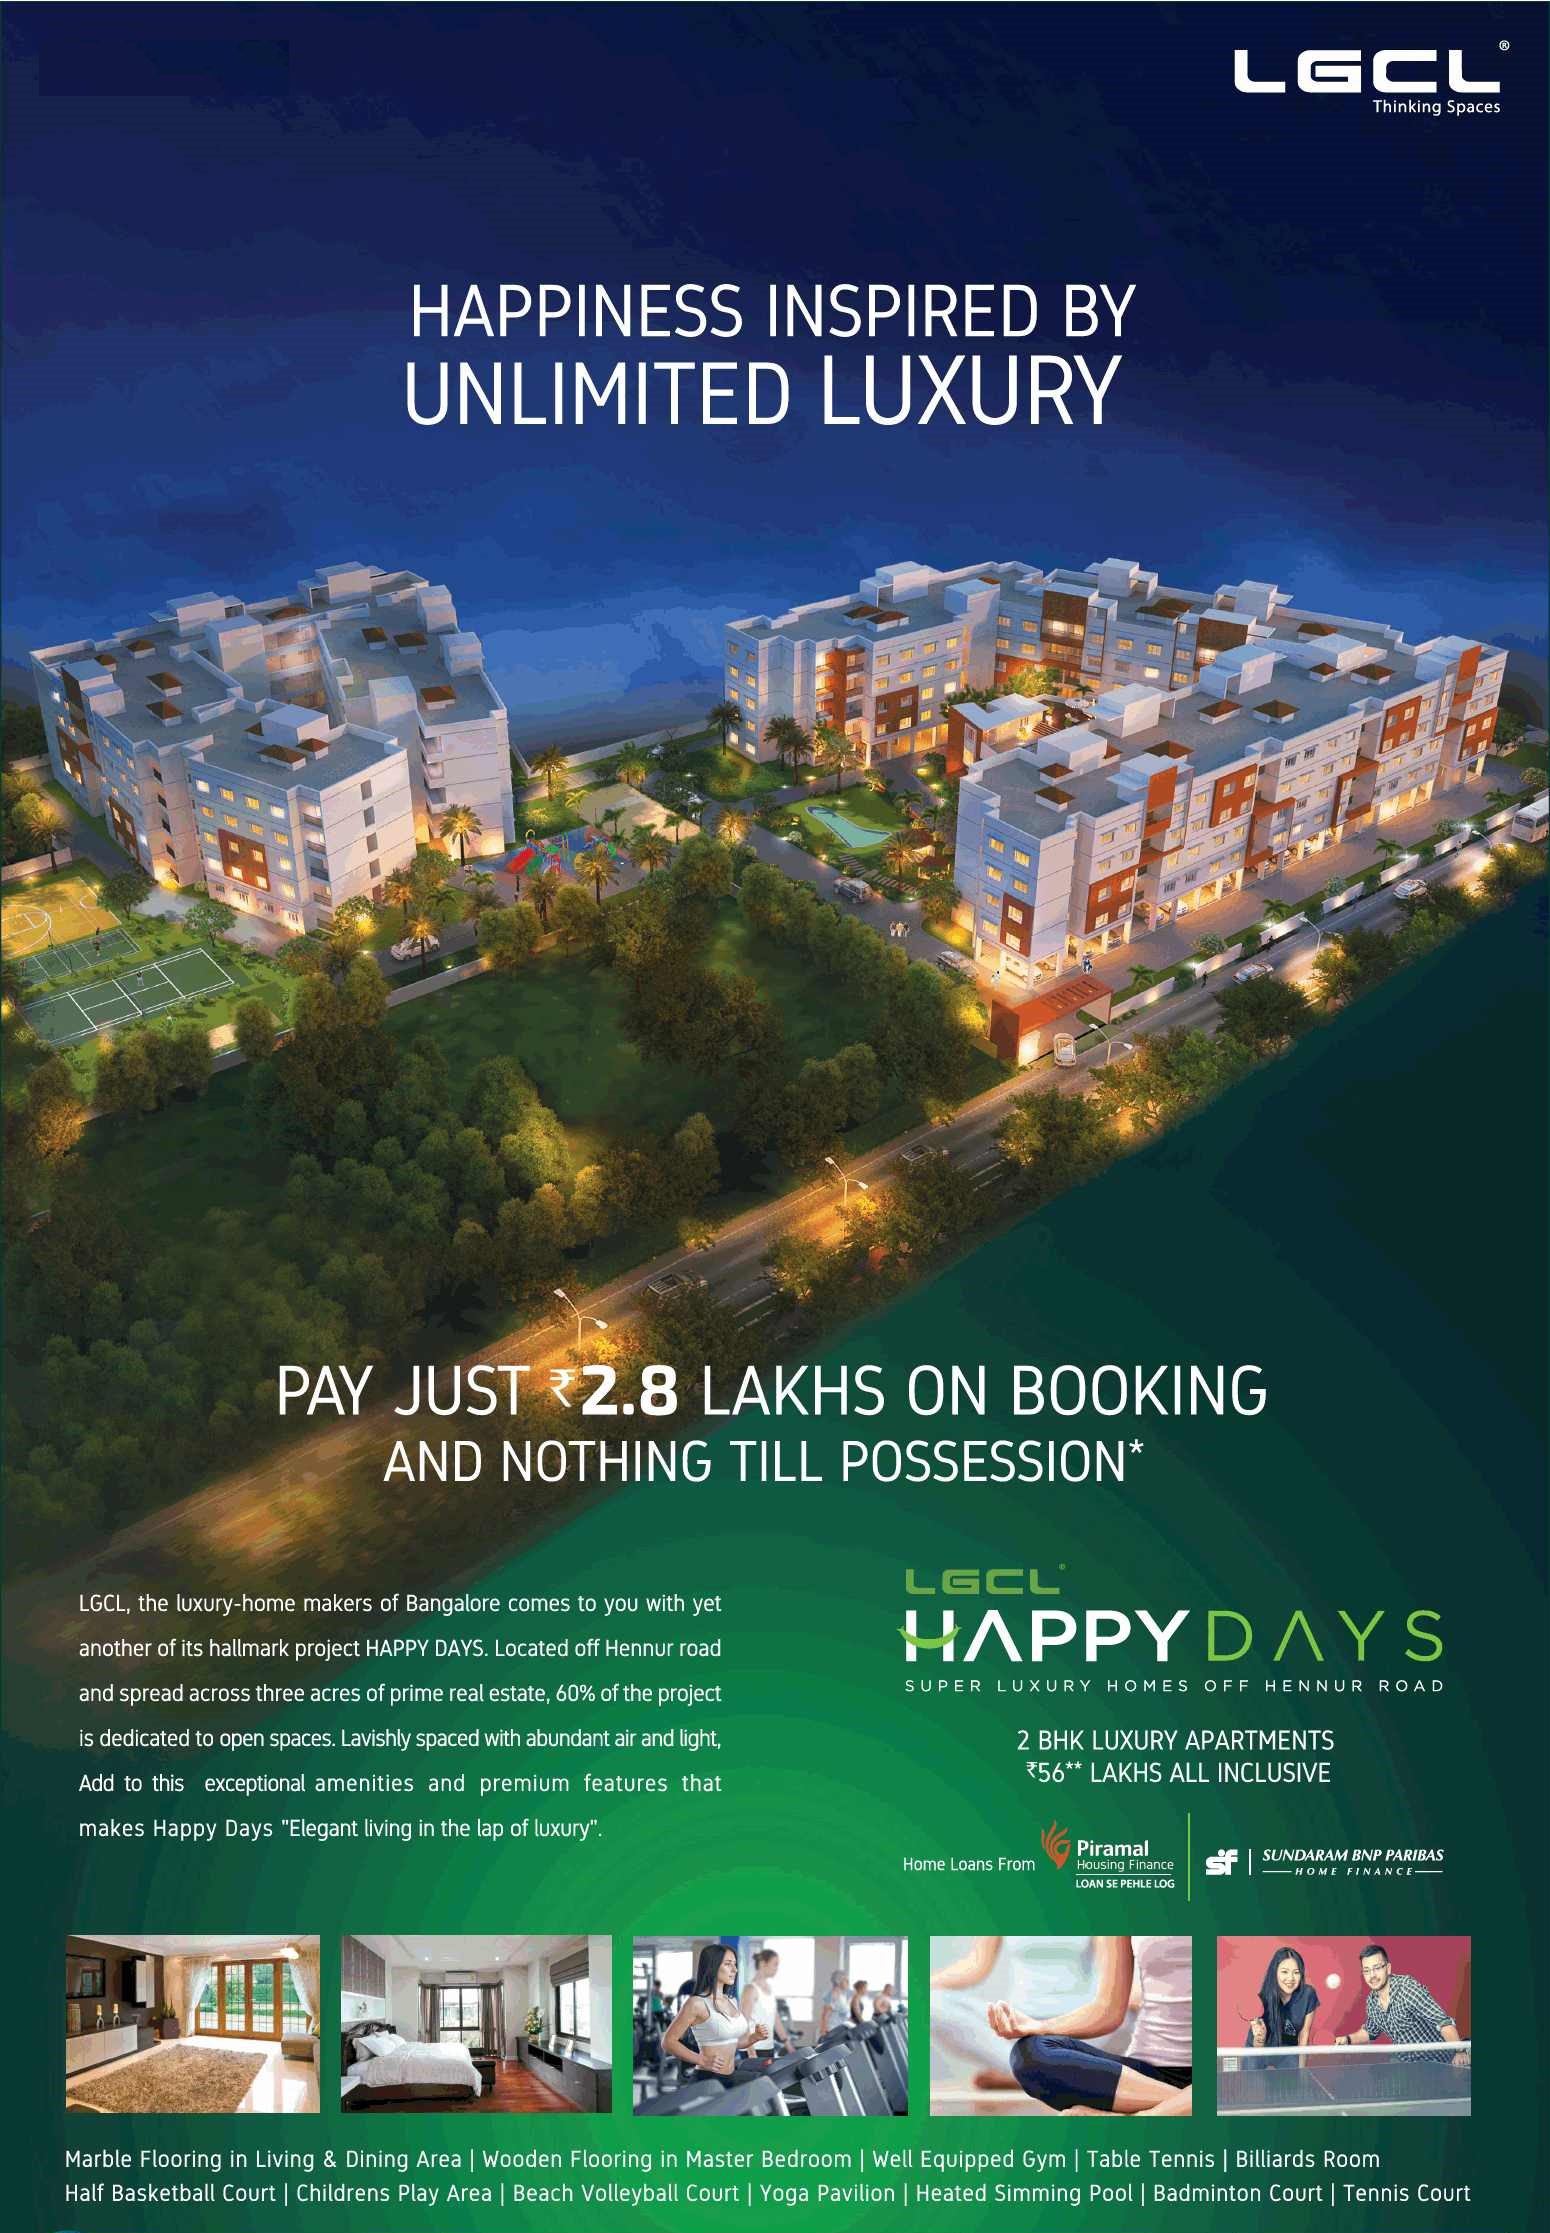 Pay just Rs. 2.8 lakhs on booking & nothing till possession at LGCL Happy Days in Bangalore